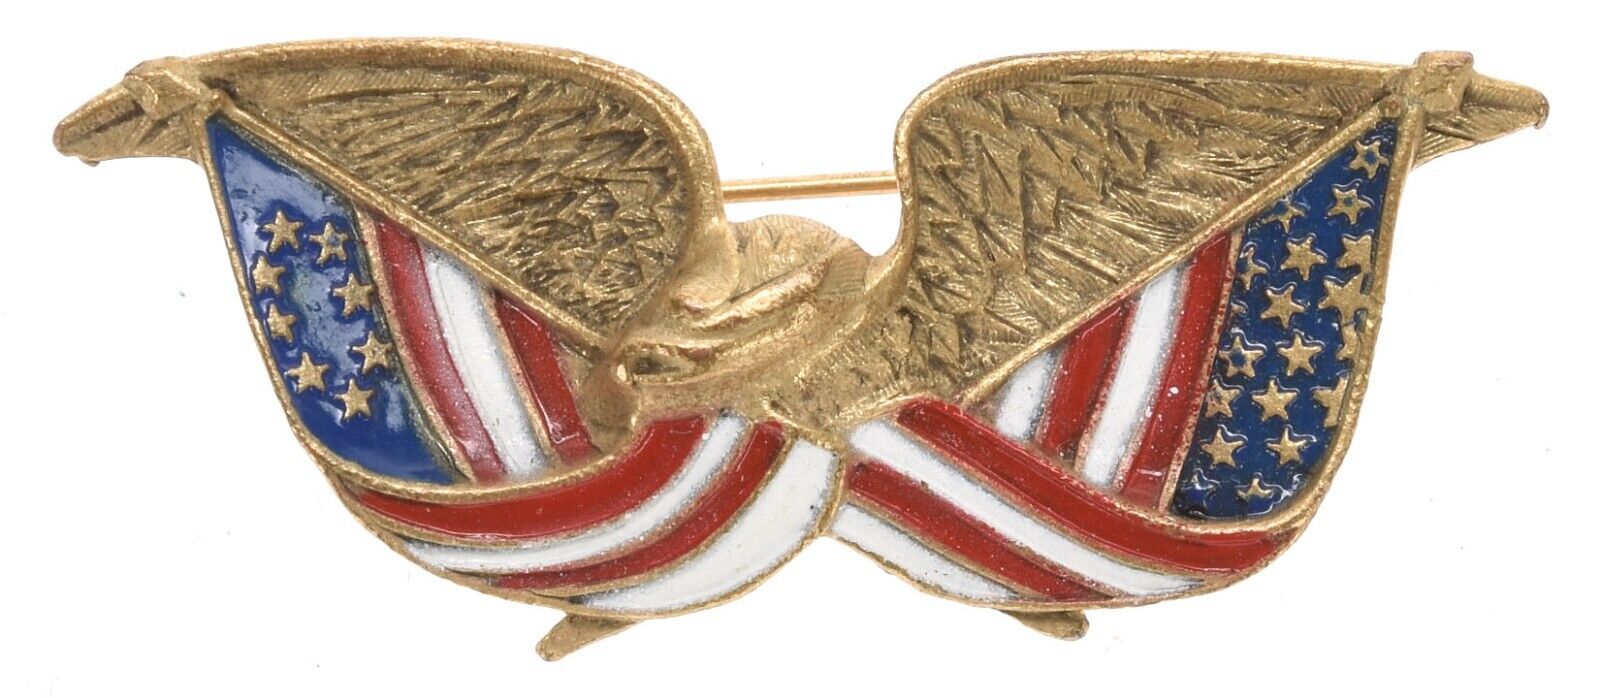 Patriotic Pin with Eagle and American Flags